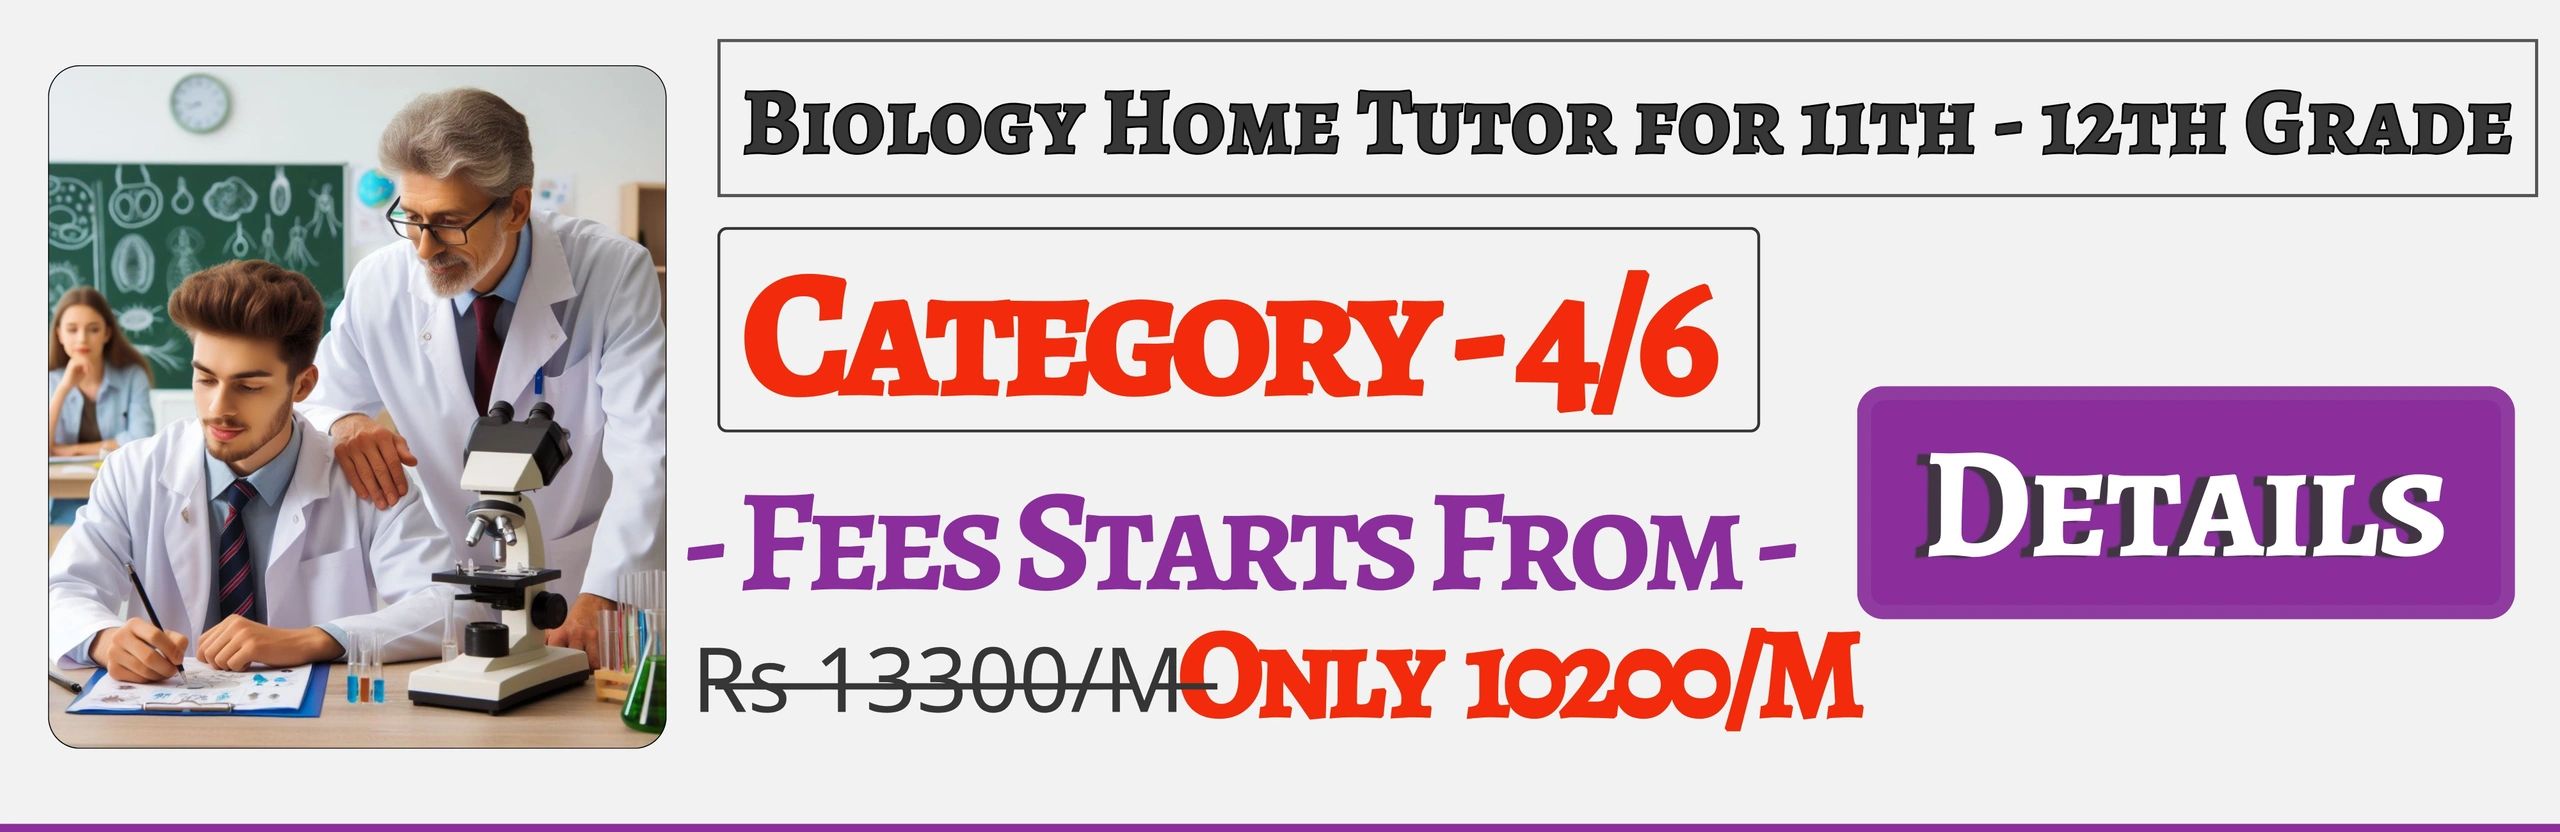 Book Best Nearby Biology Home Tuition Tutors For 11th & 12th In Jaipur , Fees Only 10200/M